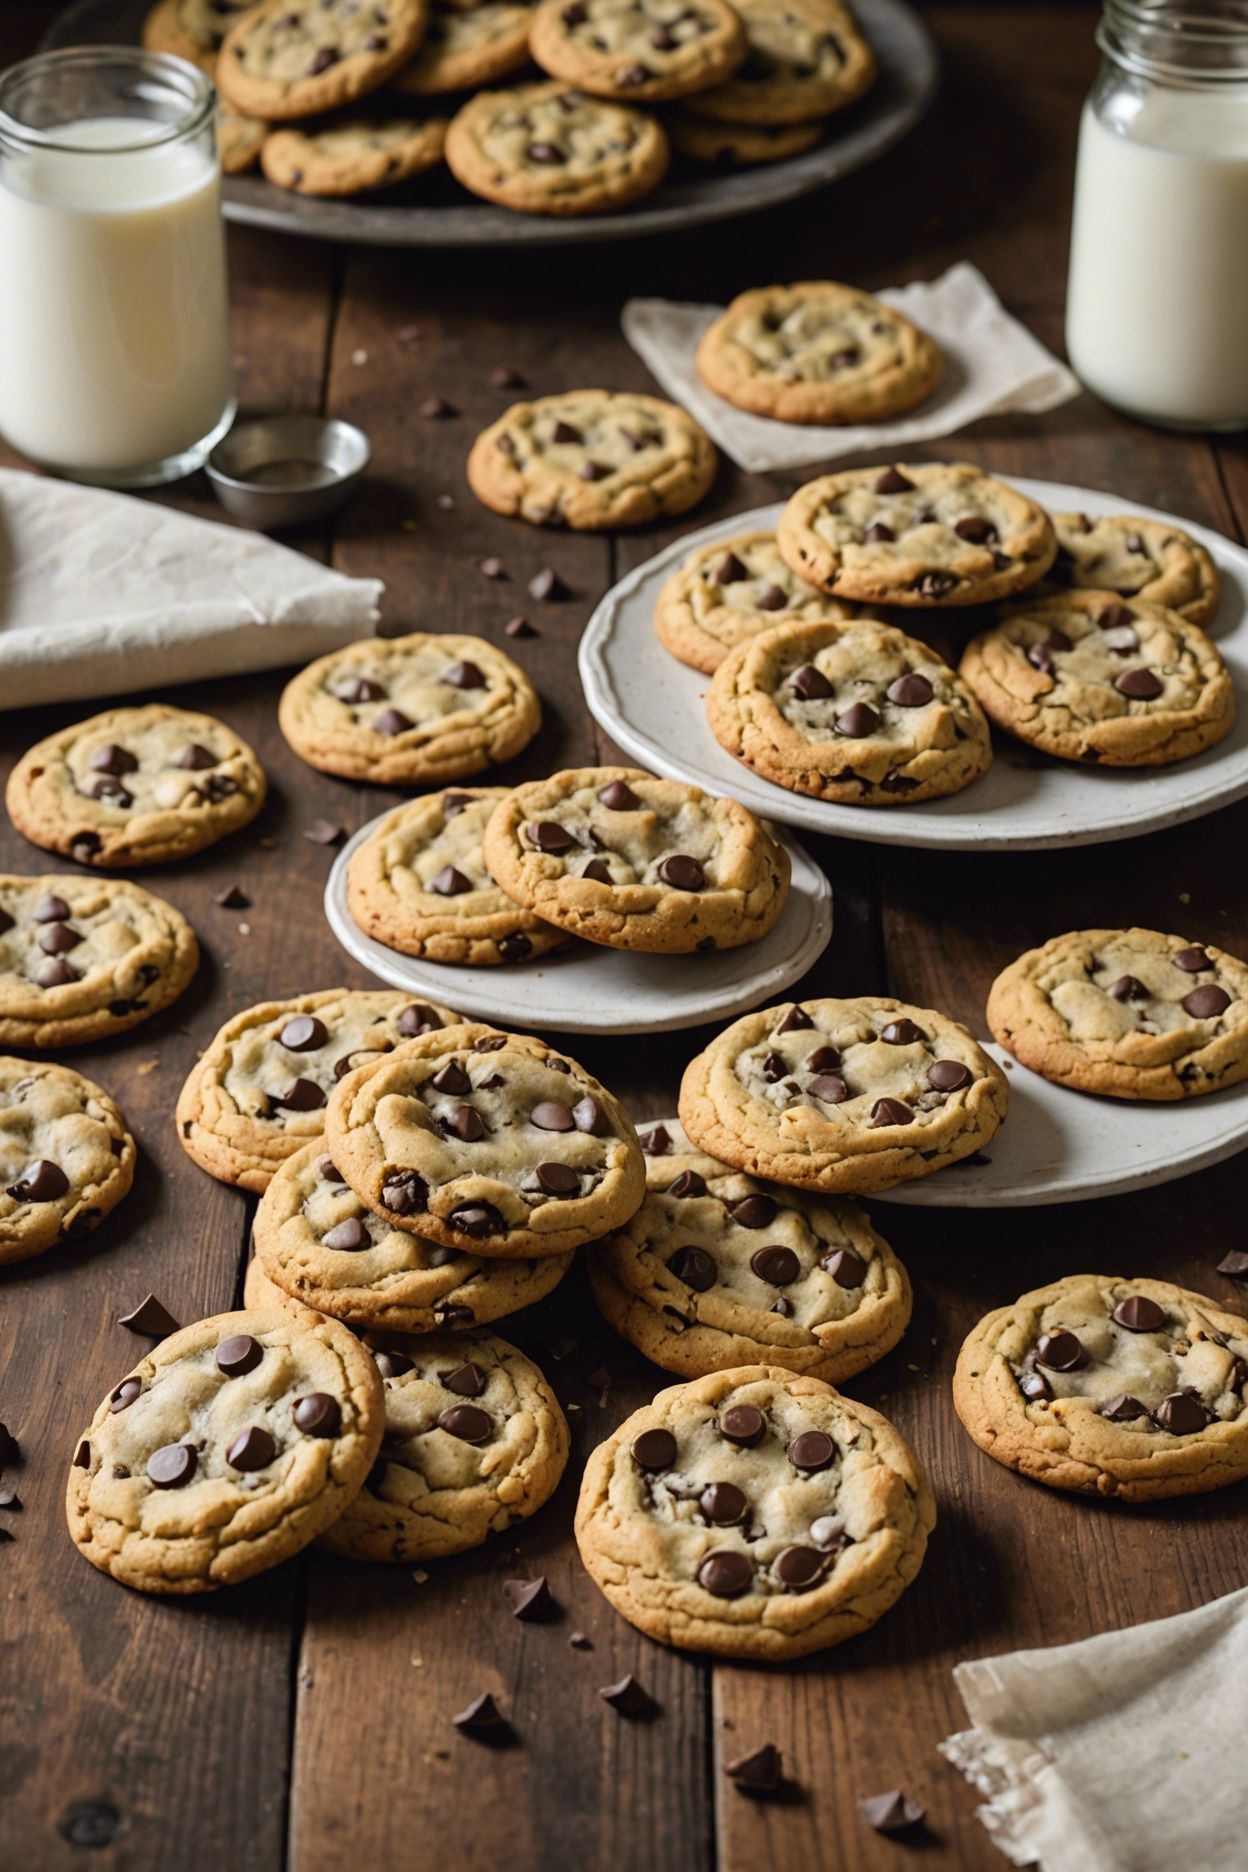 Hillary Clintons Chocolate Chip Cookies